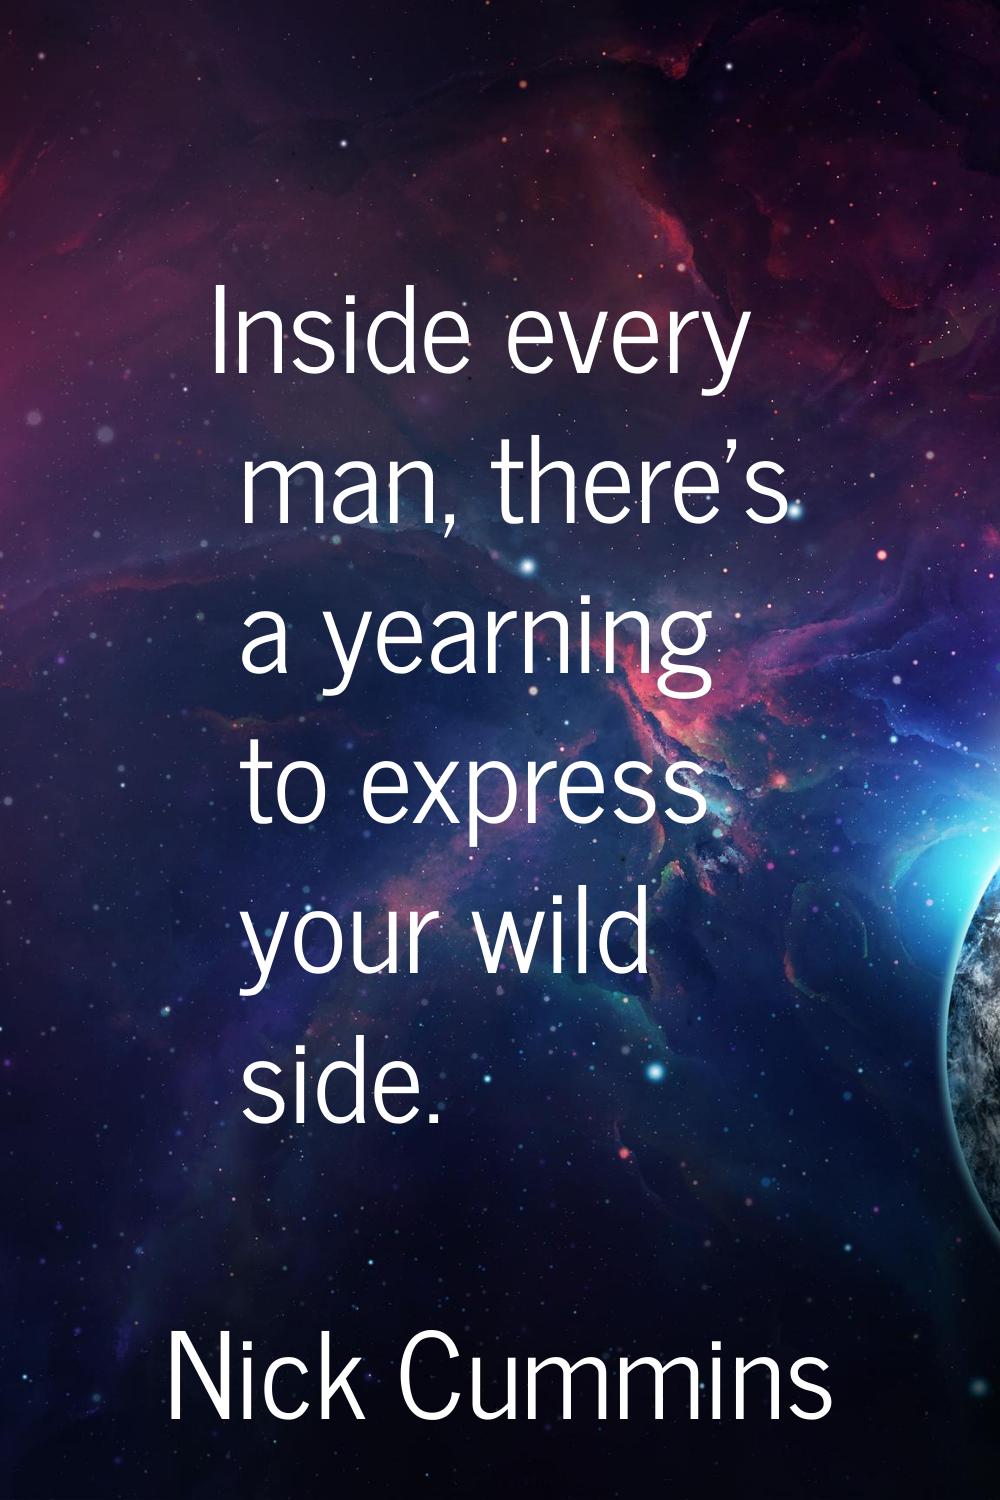 Inside every man, there's a yearning to express your wild side.